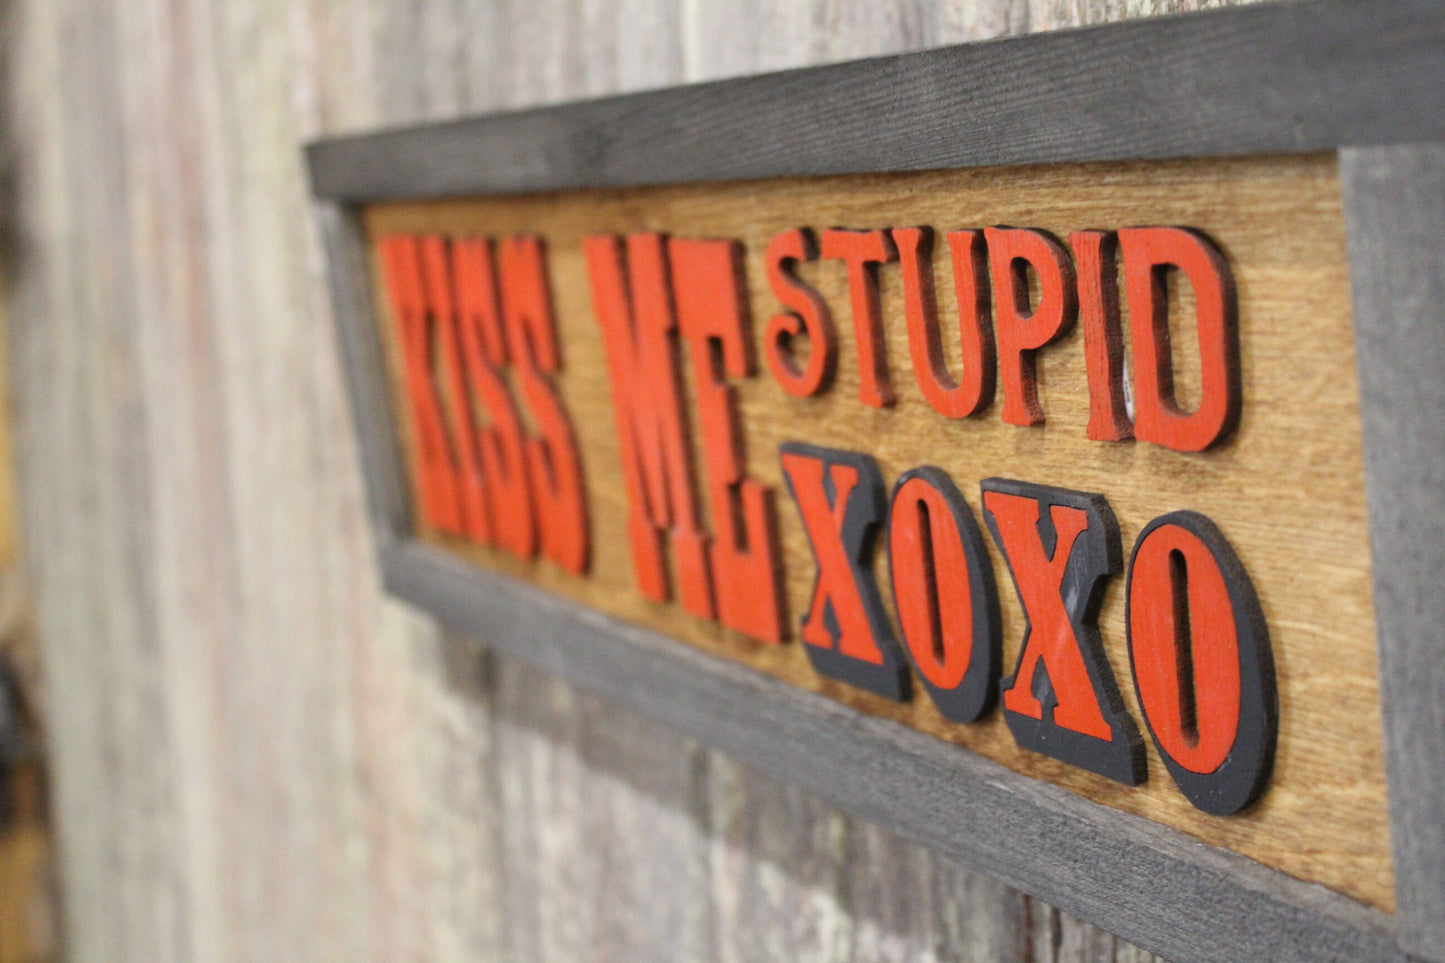 Kiss Me Stupid XOXO Valentines Day Wood Sign Boyfriend Gift Girlfriend Rustic Primitive Barnwood Text Silly Comedy Love Wall Decor Country